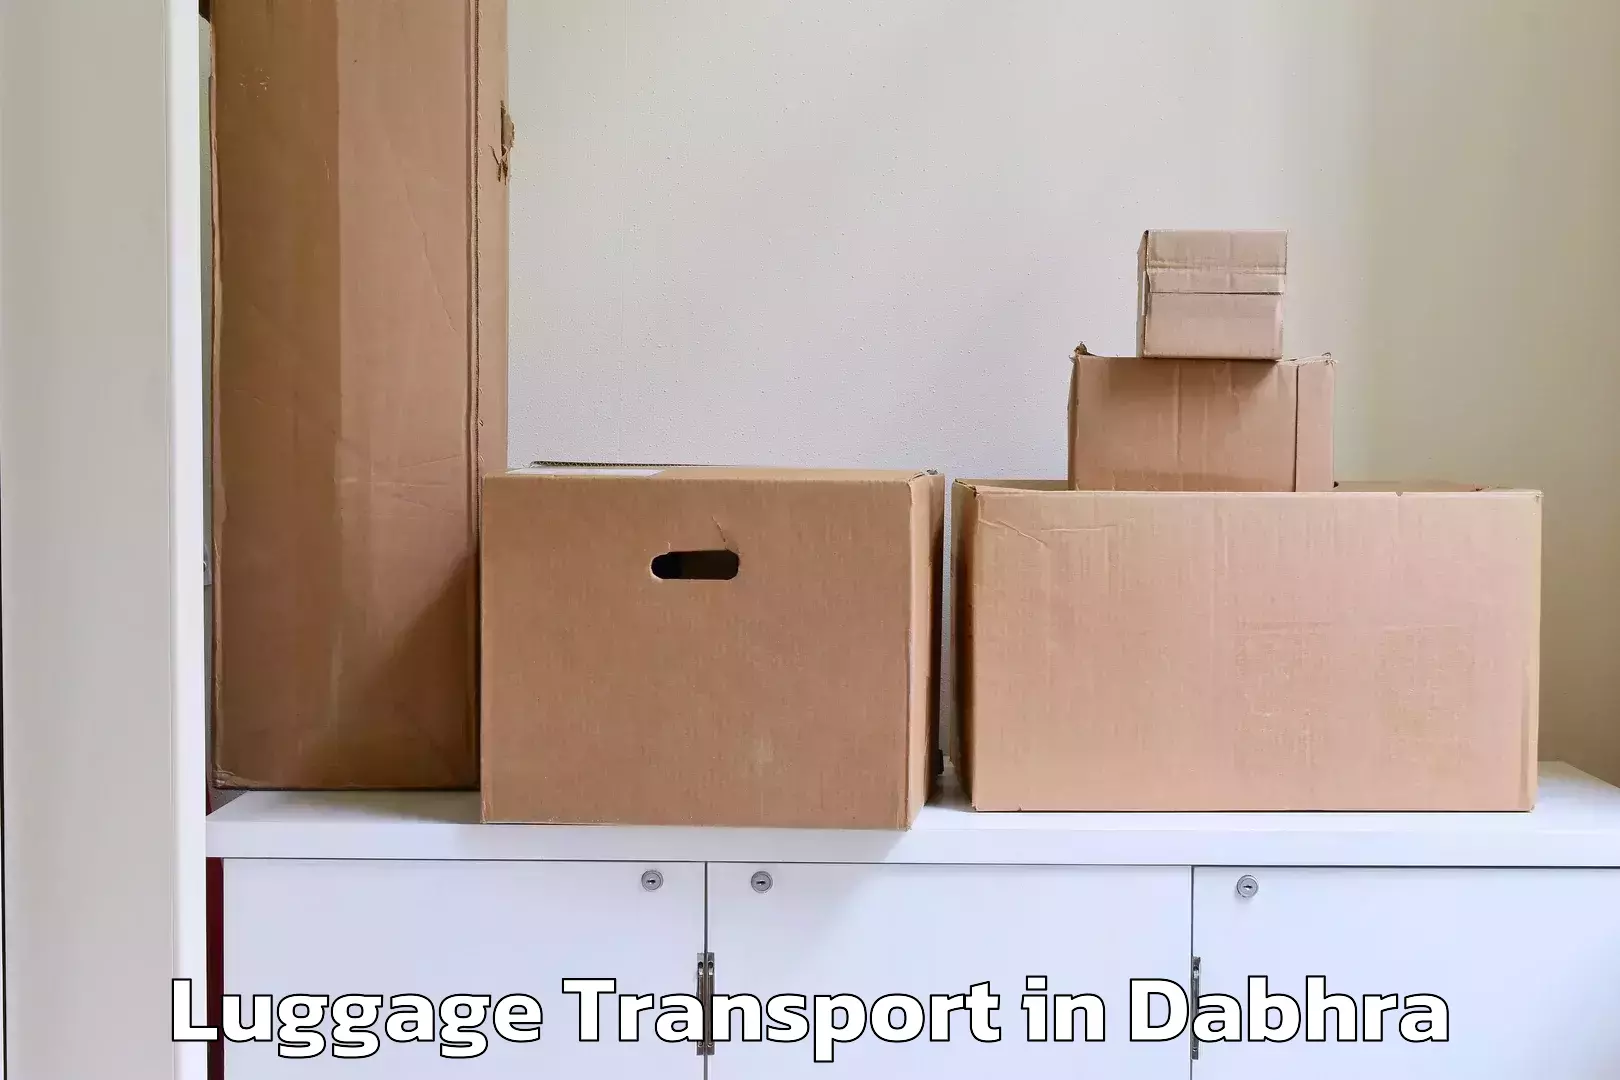 Luggage shipment tracking in Dabhra